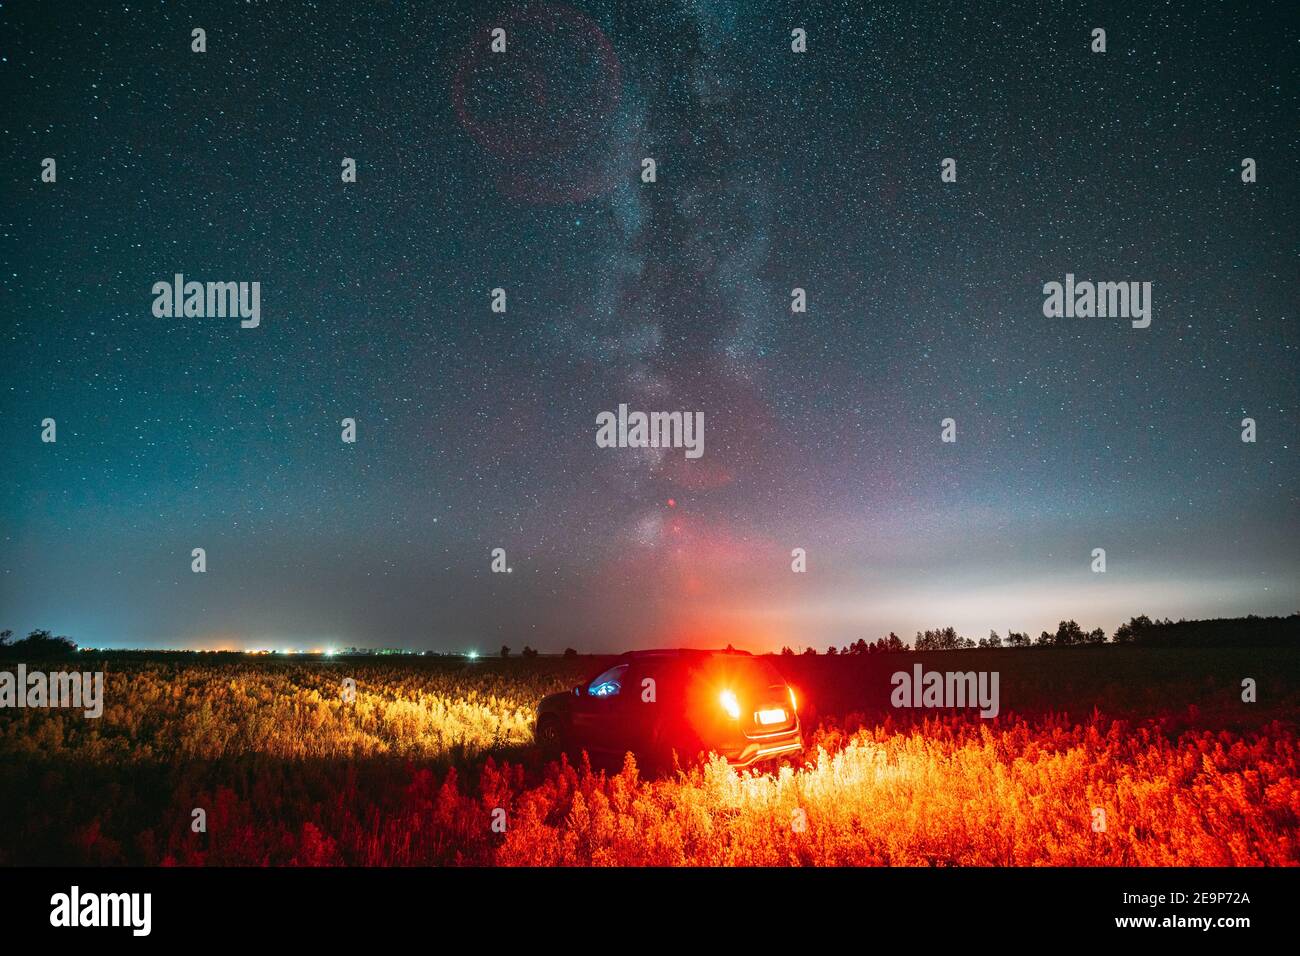 Milky Way Galaxy In Night Starry Sky With Glowing Stars Above Car SUV In Countryside Landscape. Milky Way Galaxy And Rural Field Meadow Stock Photo